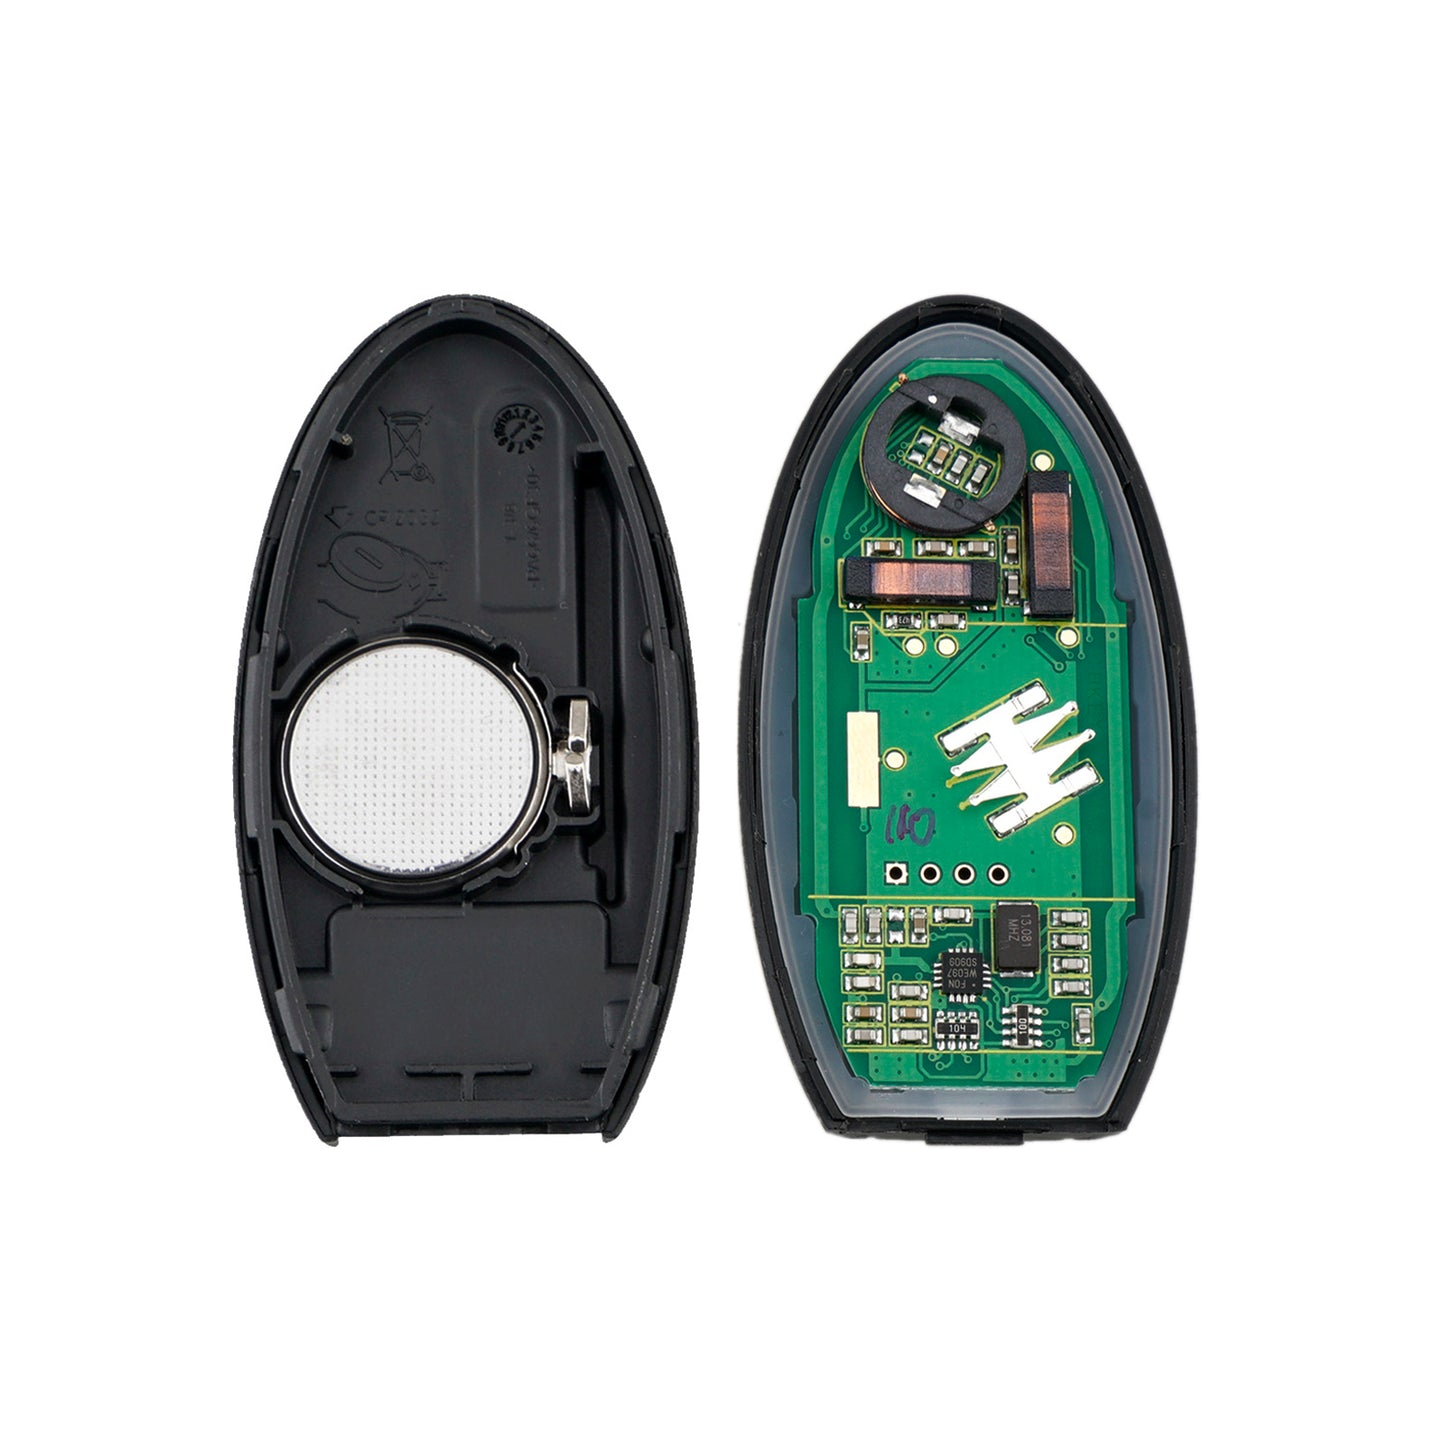 5 Buttons 433MHz Keyless Entry Fob Remote Car Key For 2015-2018 Nissan Murano (Platinum Edition) SL Pathfinder (2016 year must match PN, IC & FCC number, split year) FCC ID: KR5S180144014 SKU : J323